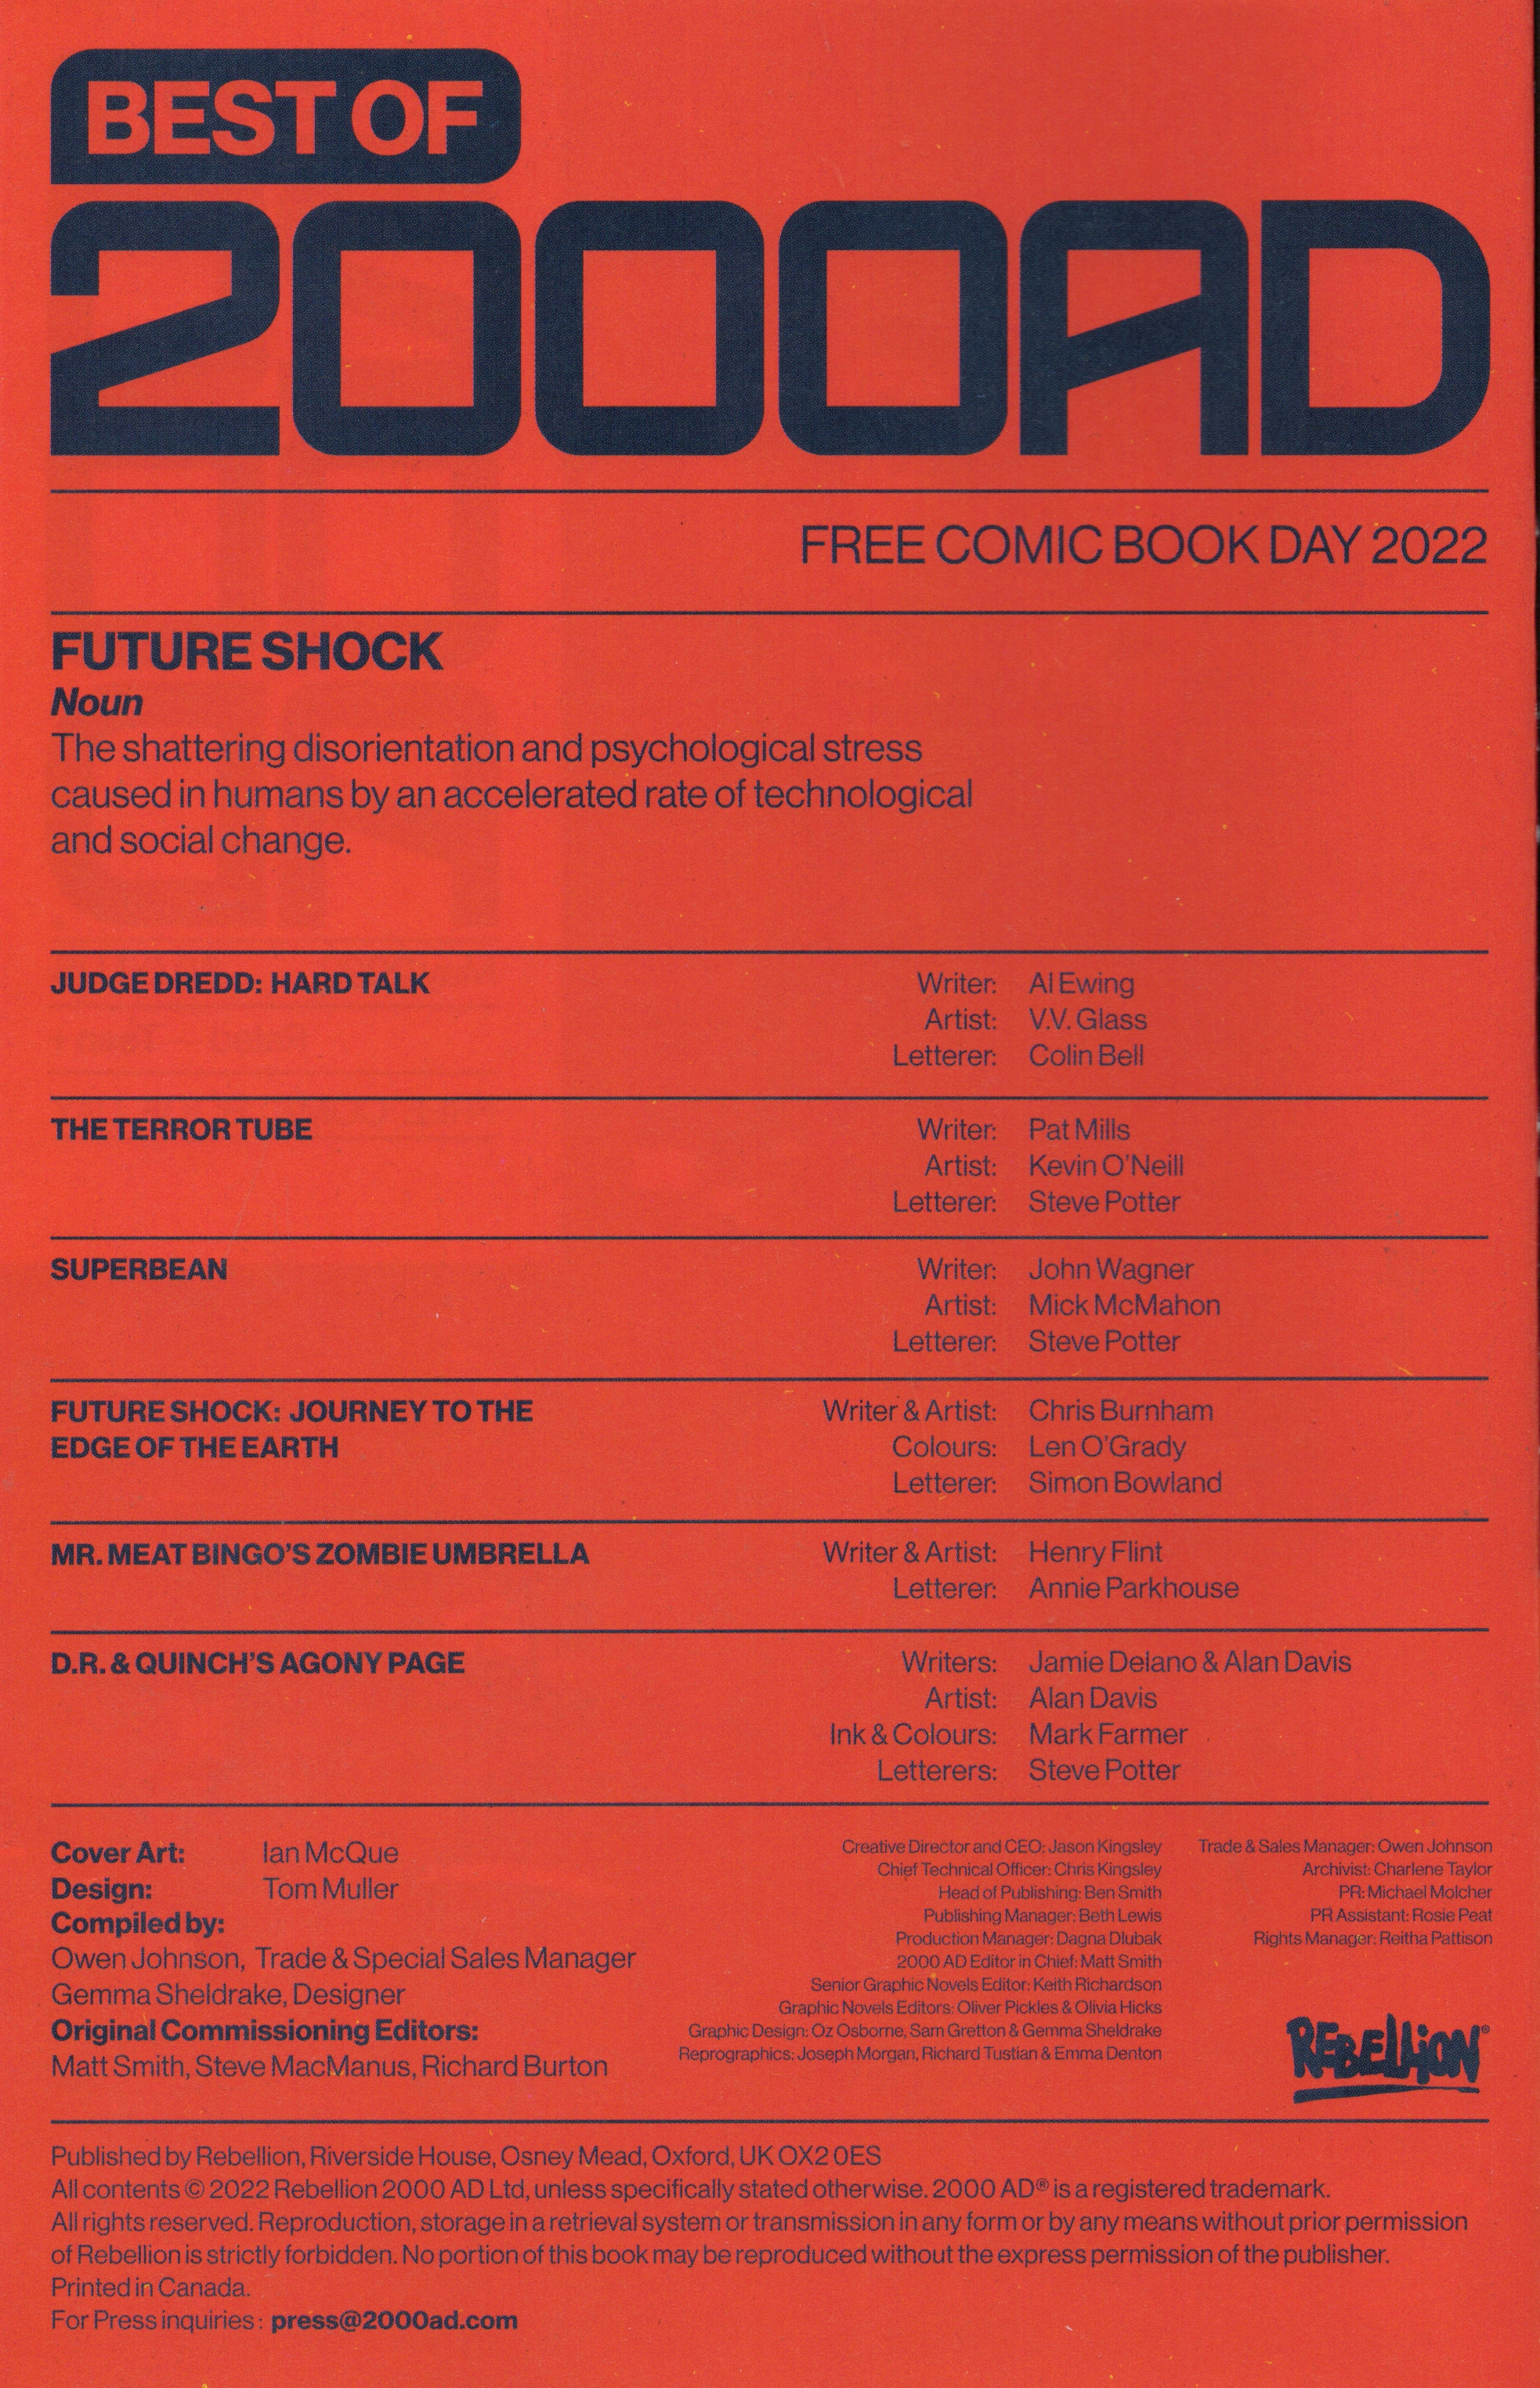 Read online Free Comic Book Day 2022 comic -  Issue # 2000AD Best Of 2000AD - 2